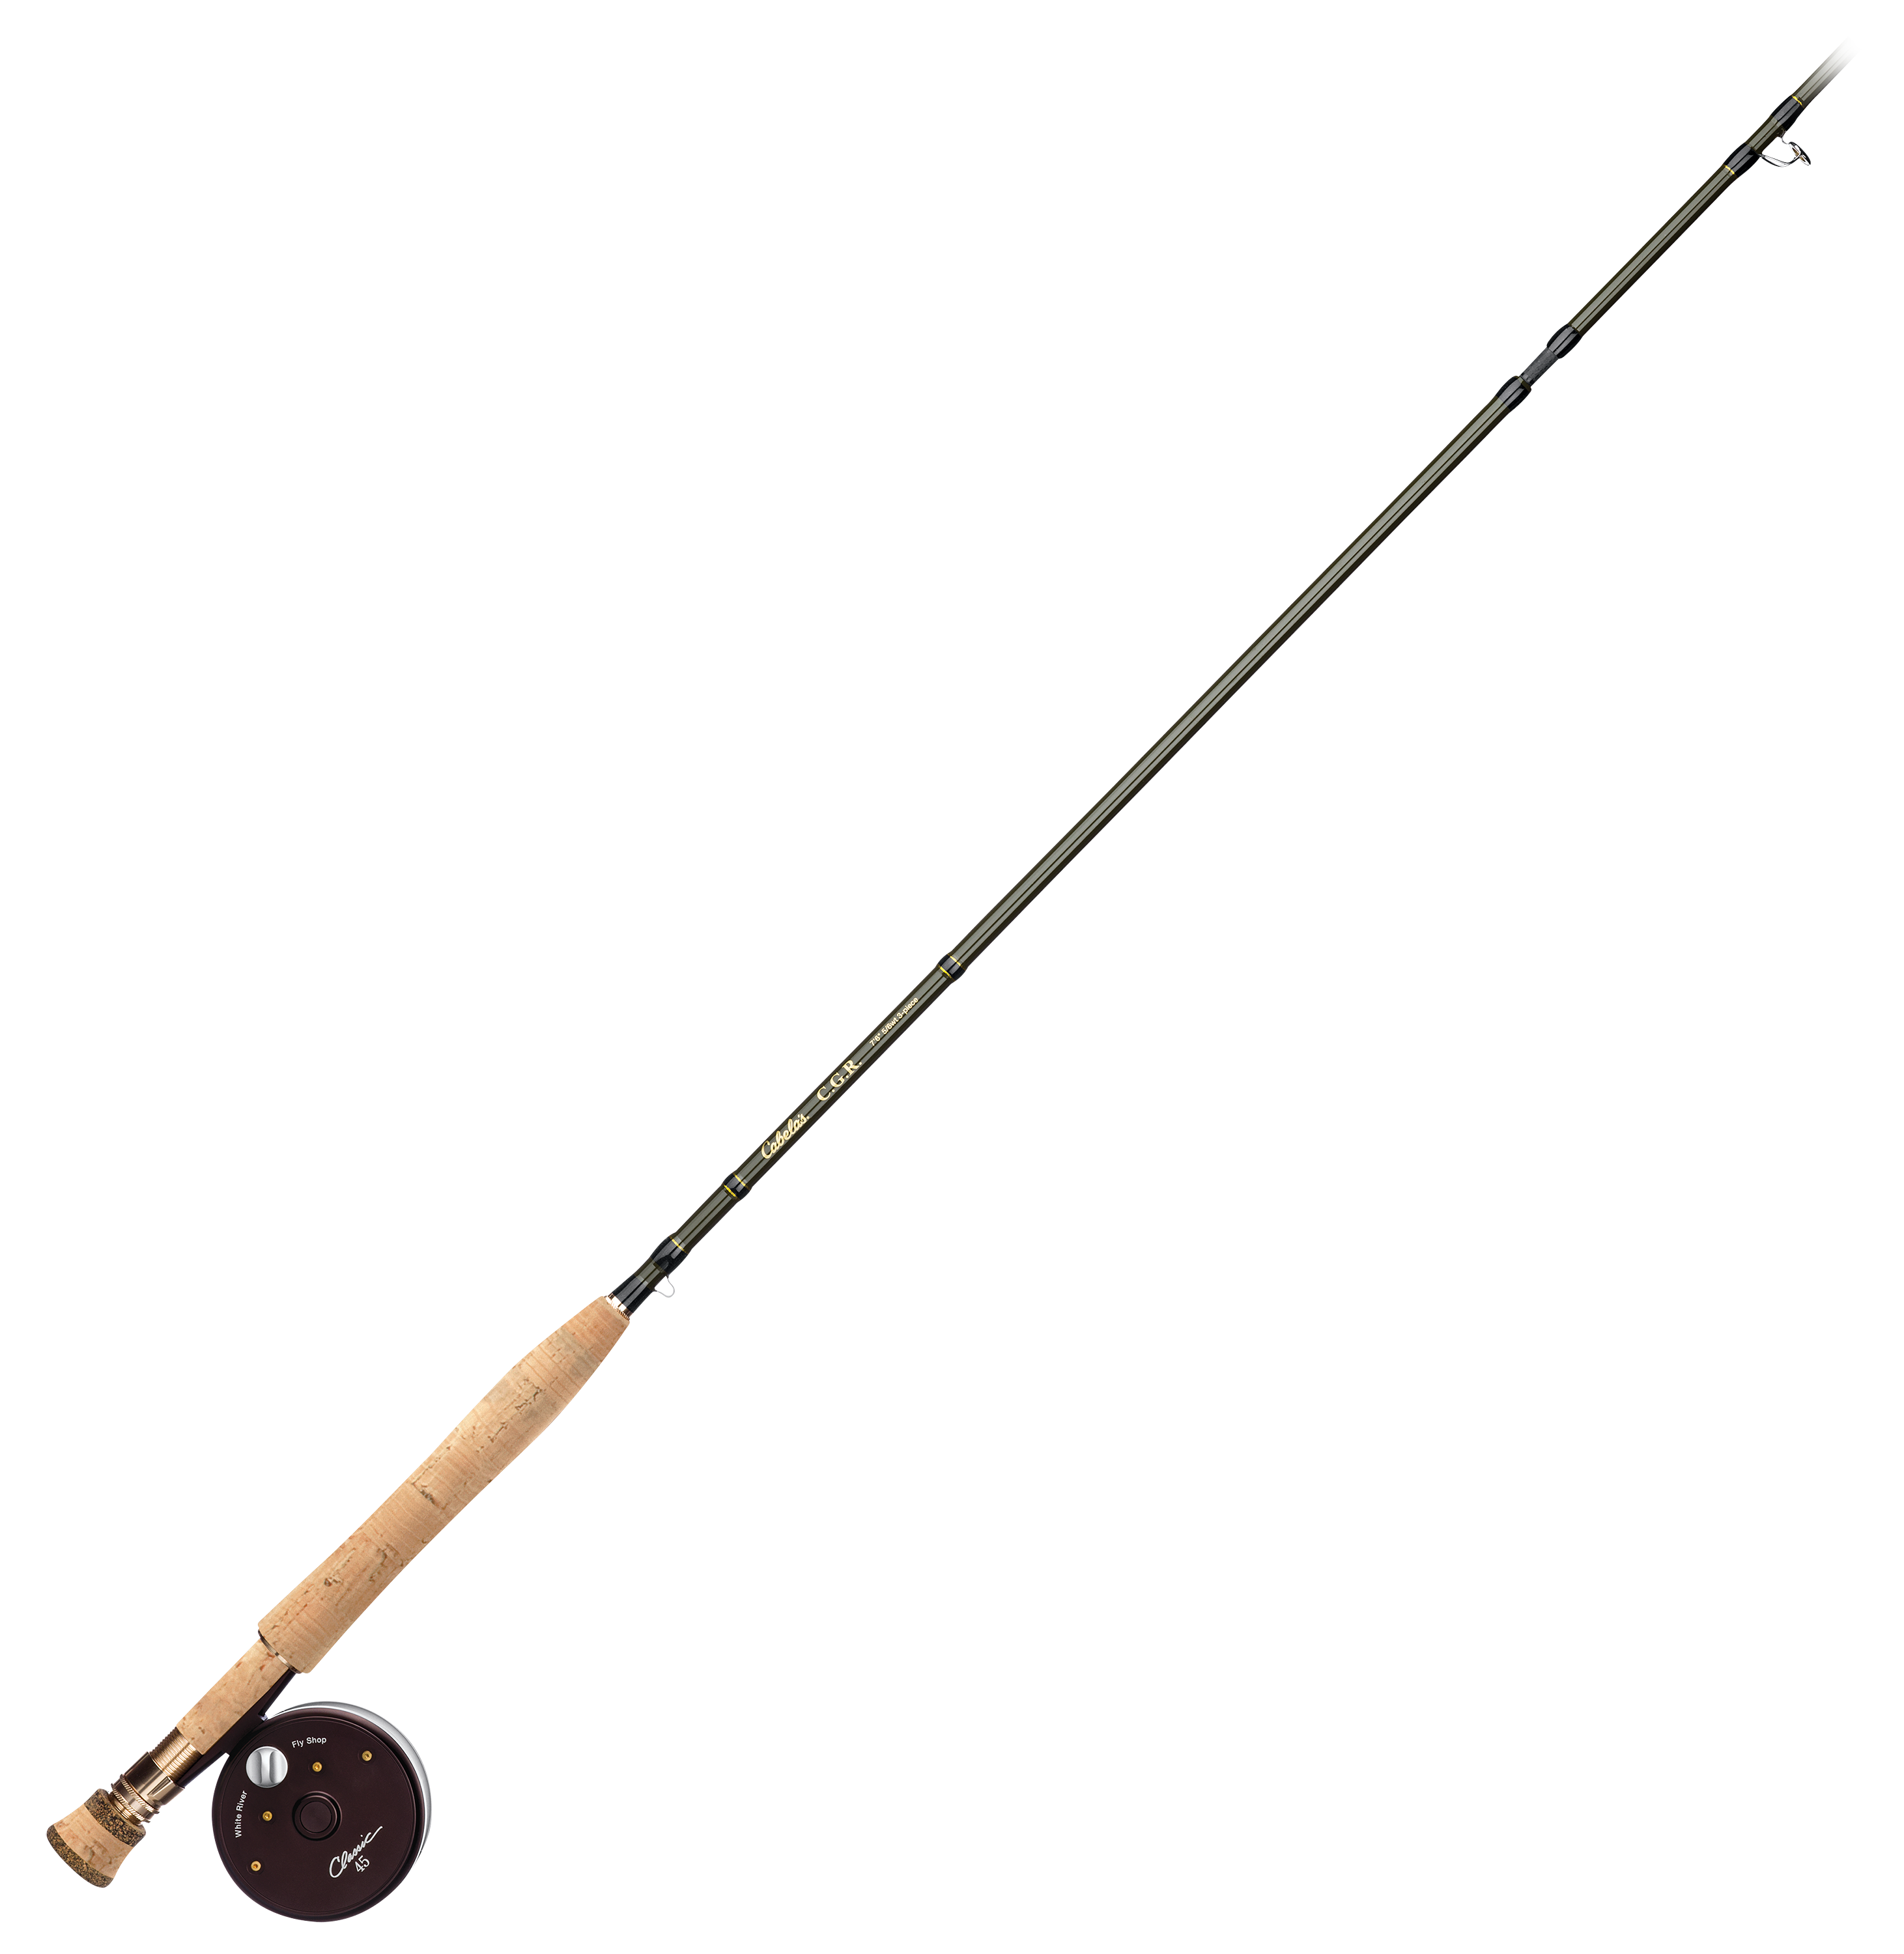 White River Fly Shop Bighorn Fly Rod - Cabelas - White RIVER - Rods